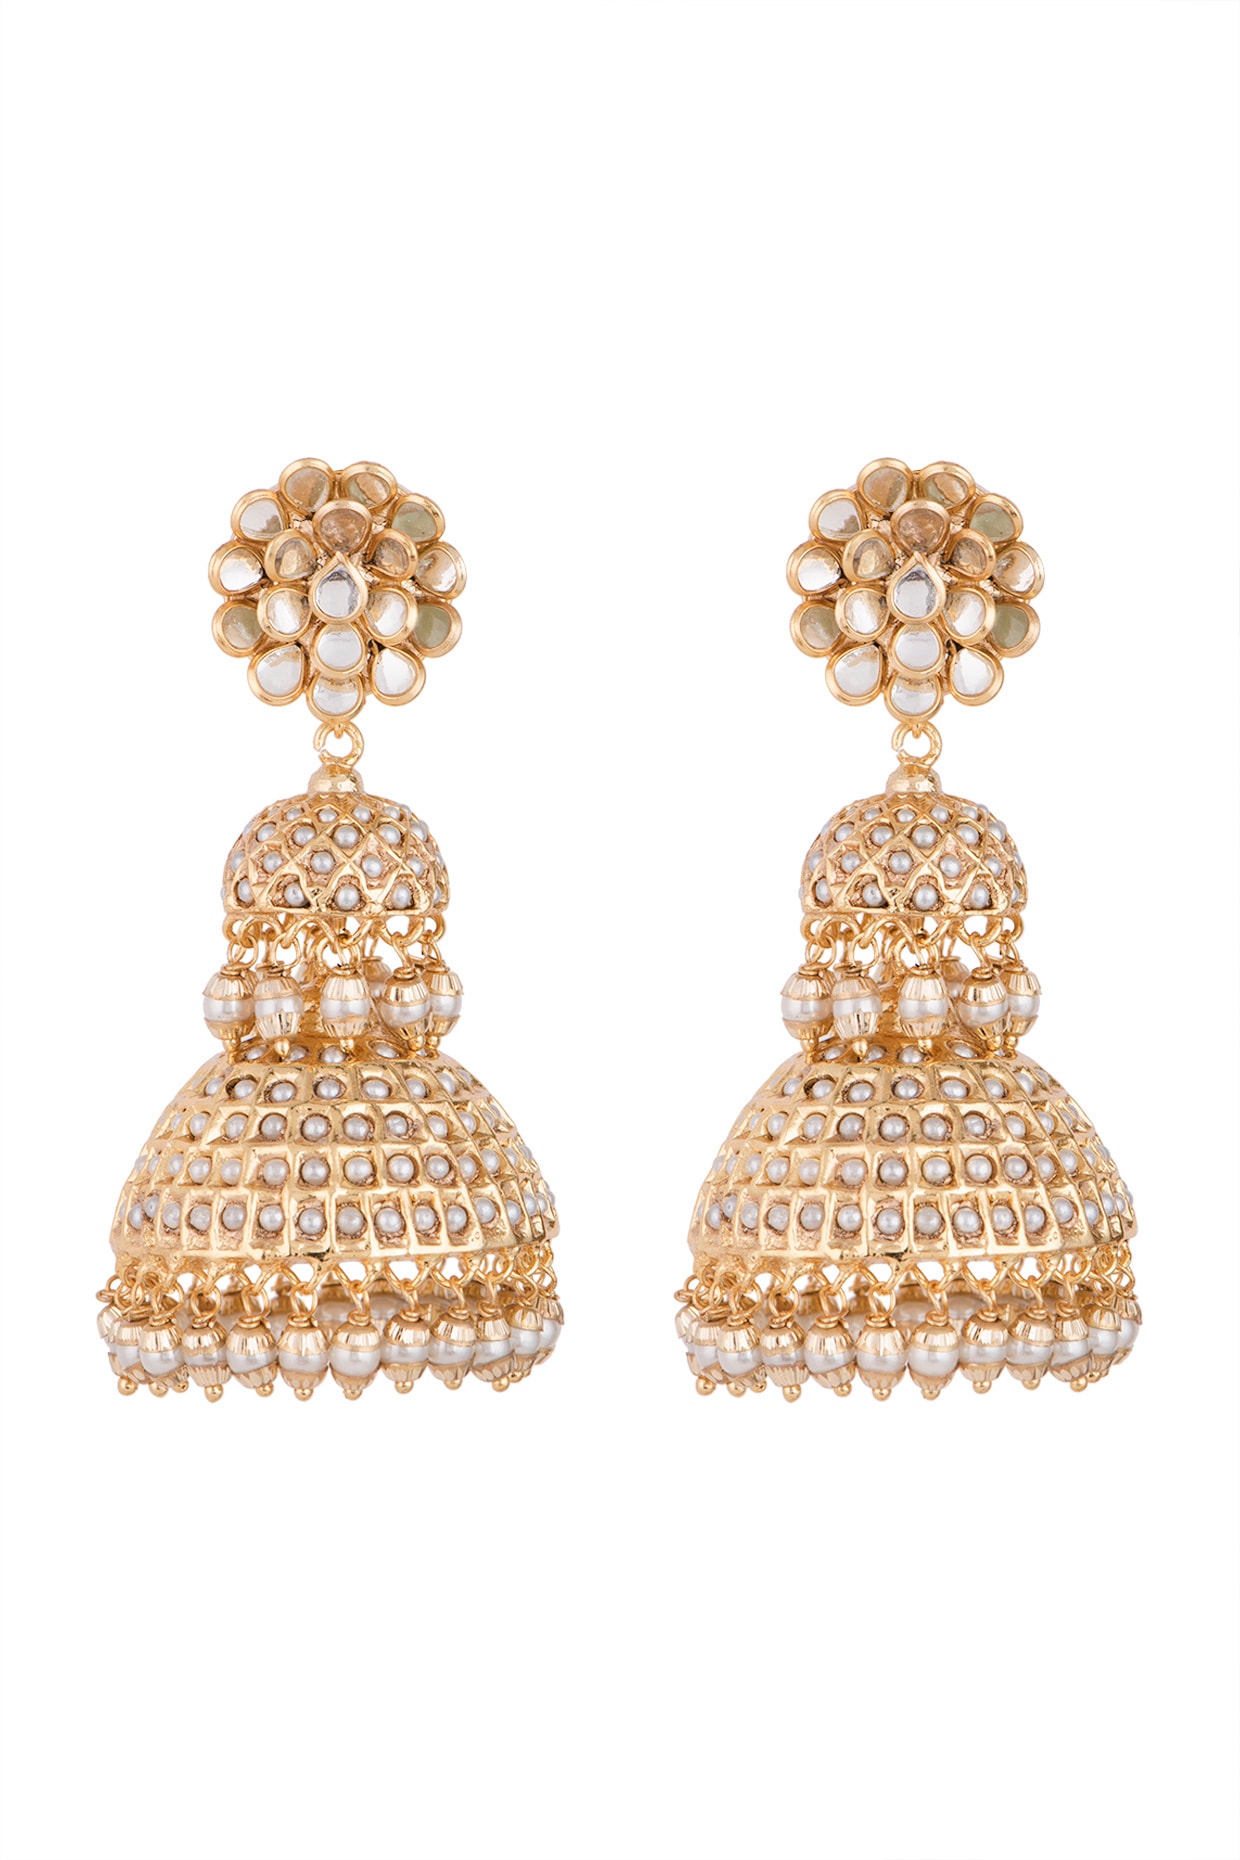 Aggregate more than 108 moti earrings gold best